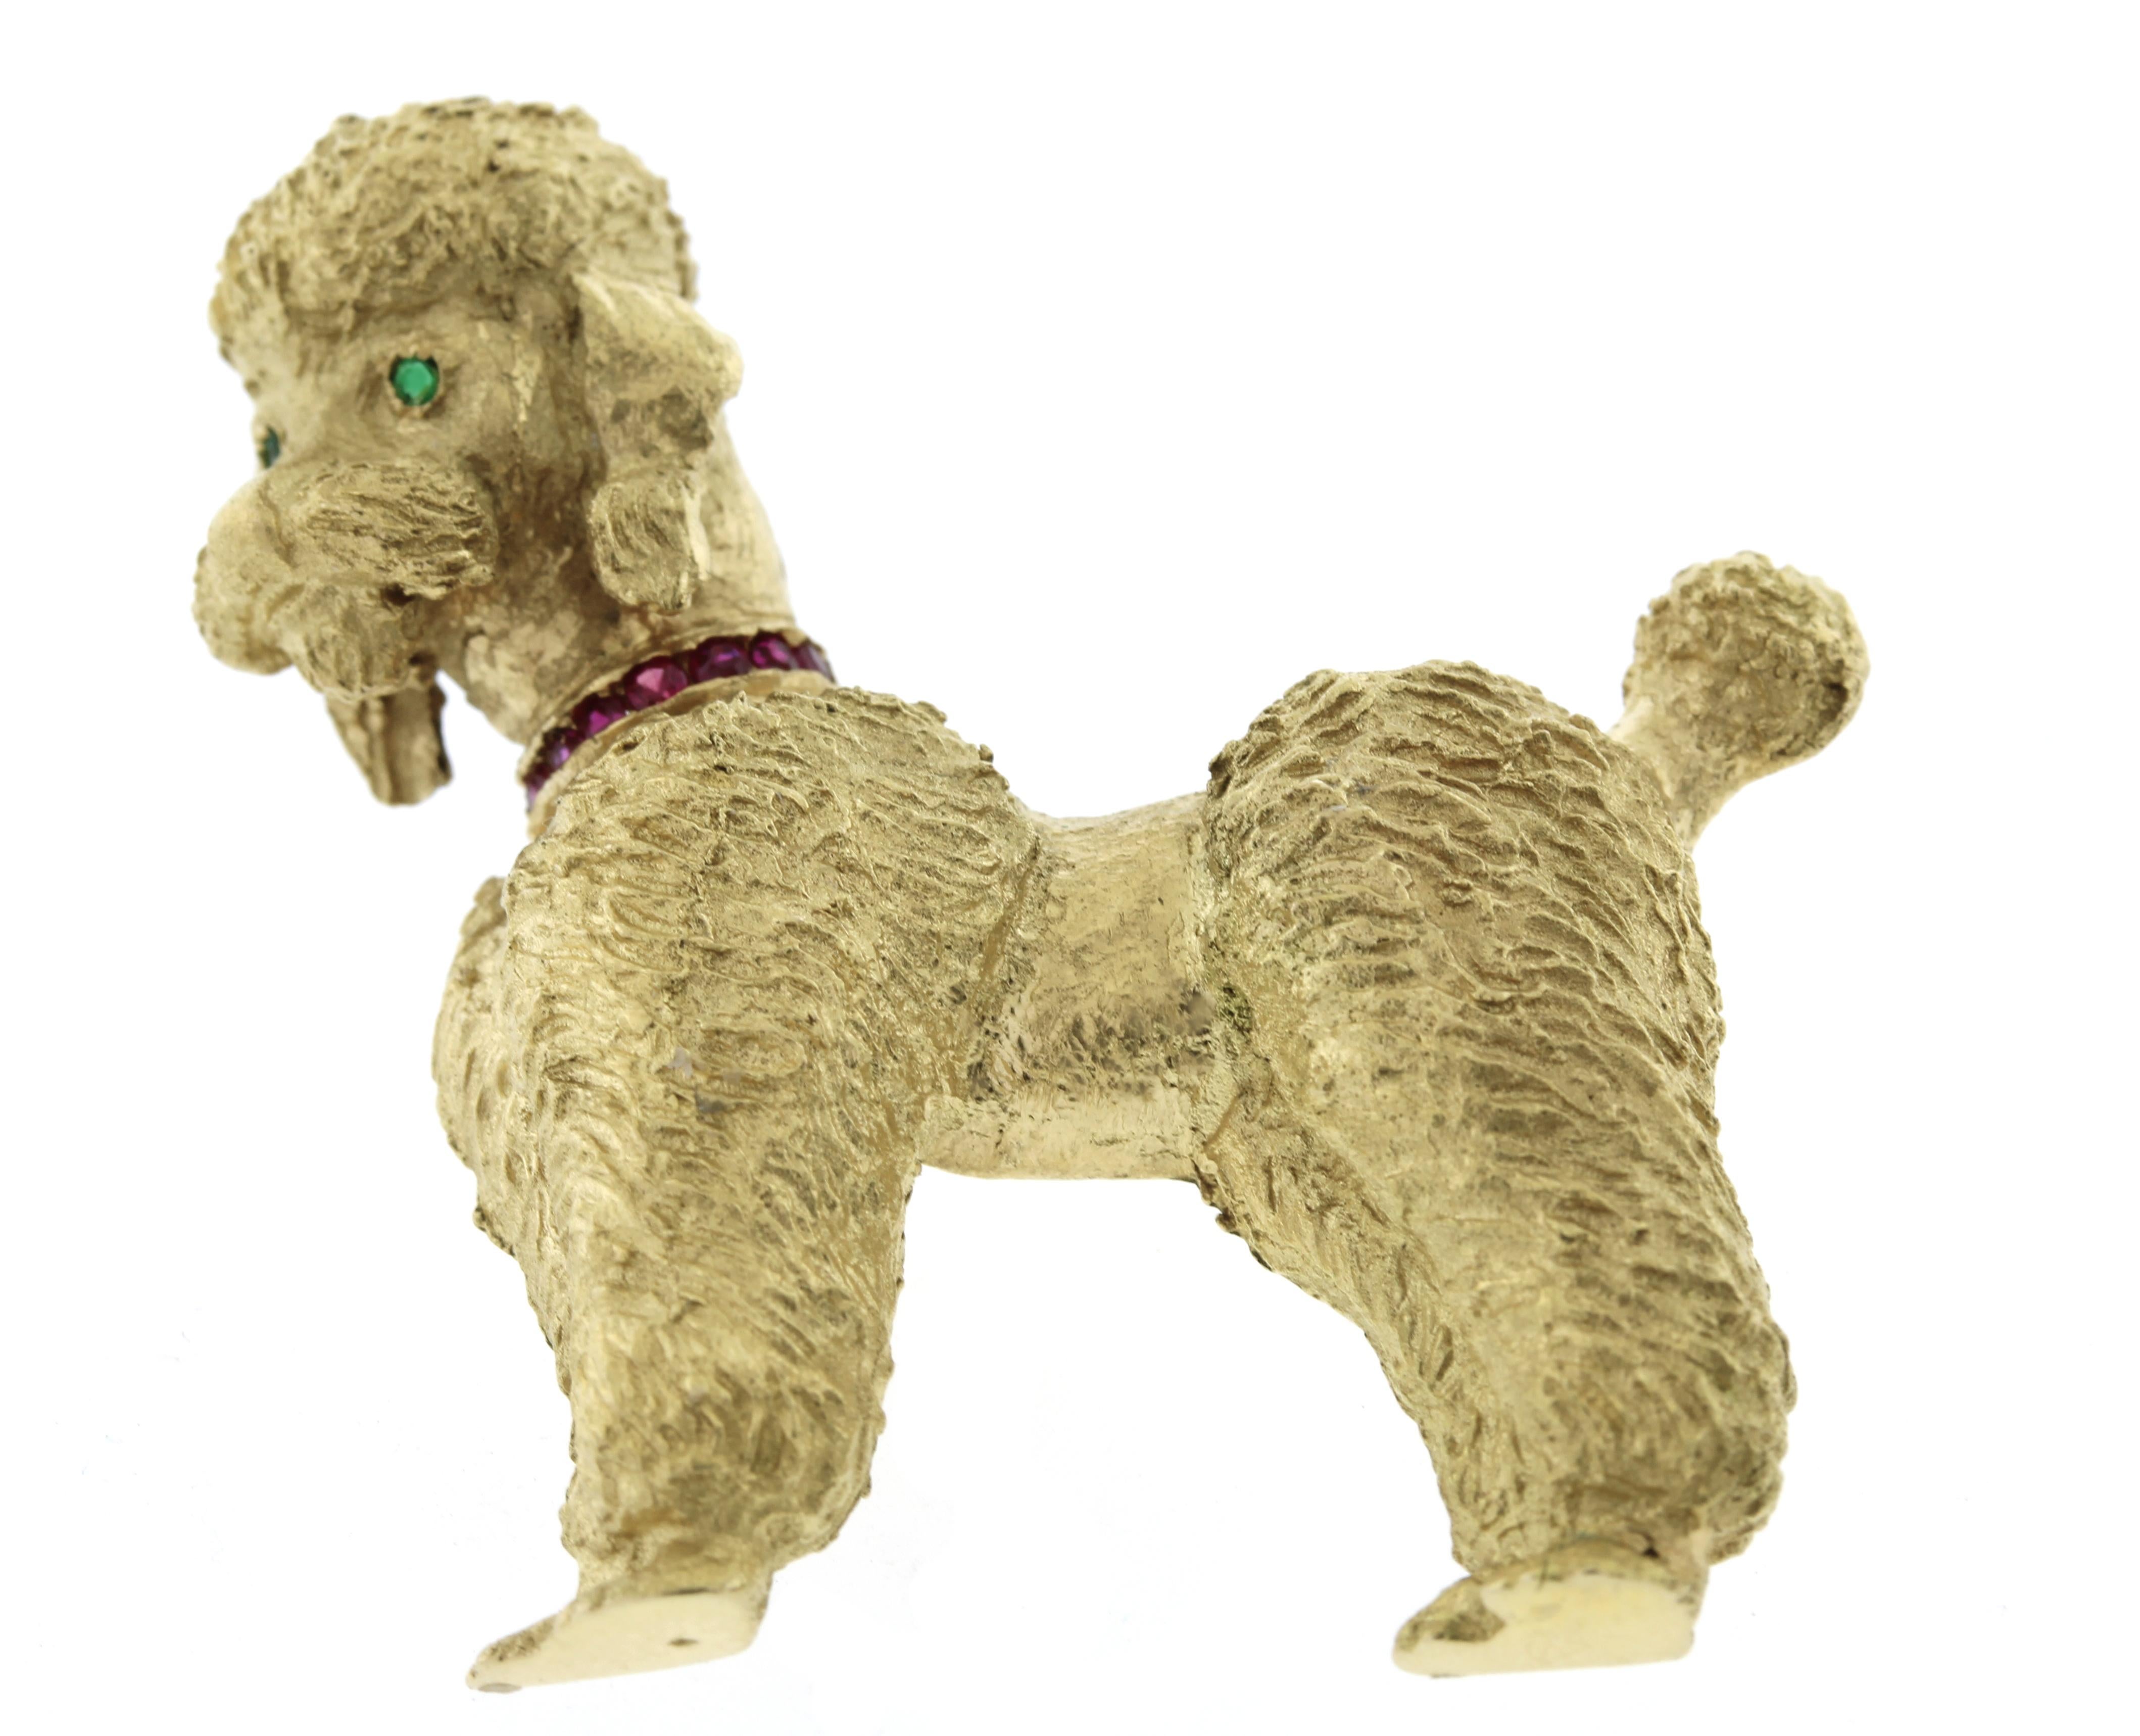 From Tiffany, this poodle brooch has a ruby collar with emerald eyes.
• Designer: Tiffany & Co
• Metal: 14kt yellow gold
• Stamps: Tiffany, 14kt
• Gemstones: 6 Rubies and  2 Emeralds
• Dimensions: 1.5 by 1.25 inches
• Circa:1950s-1960s
• Packaging: